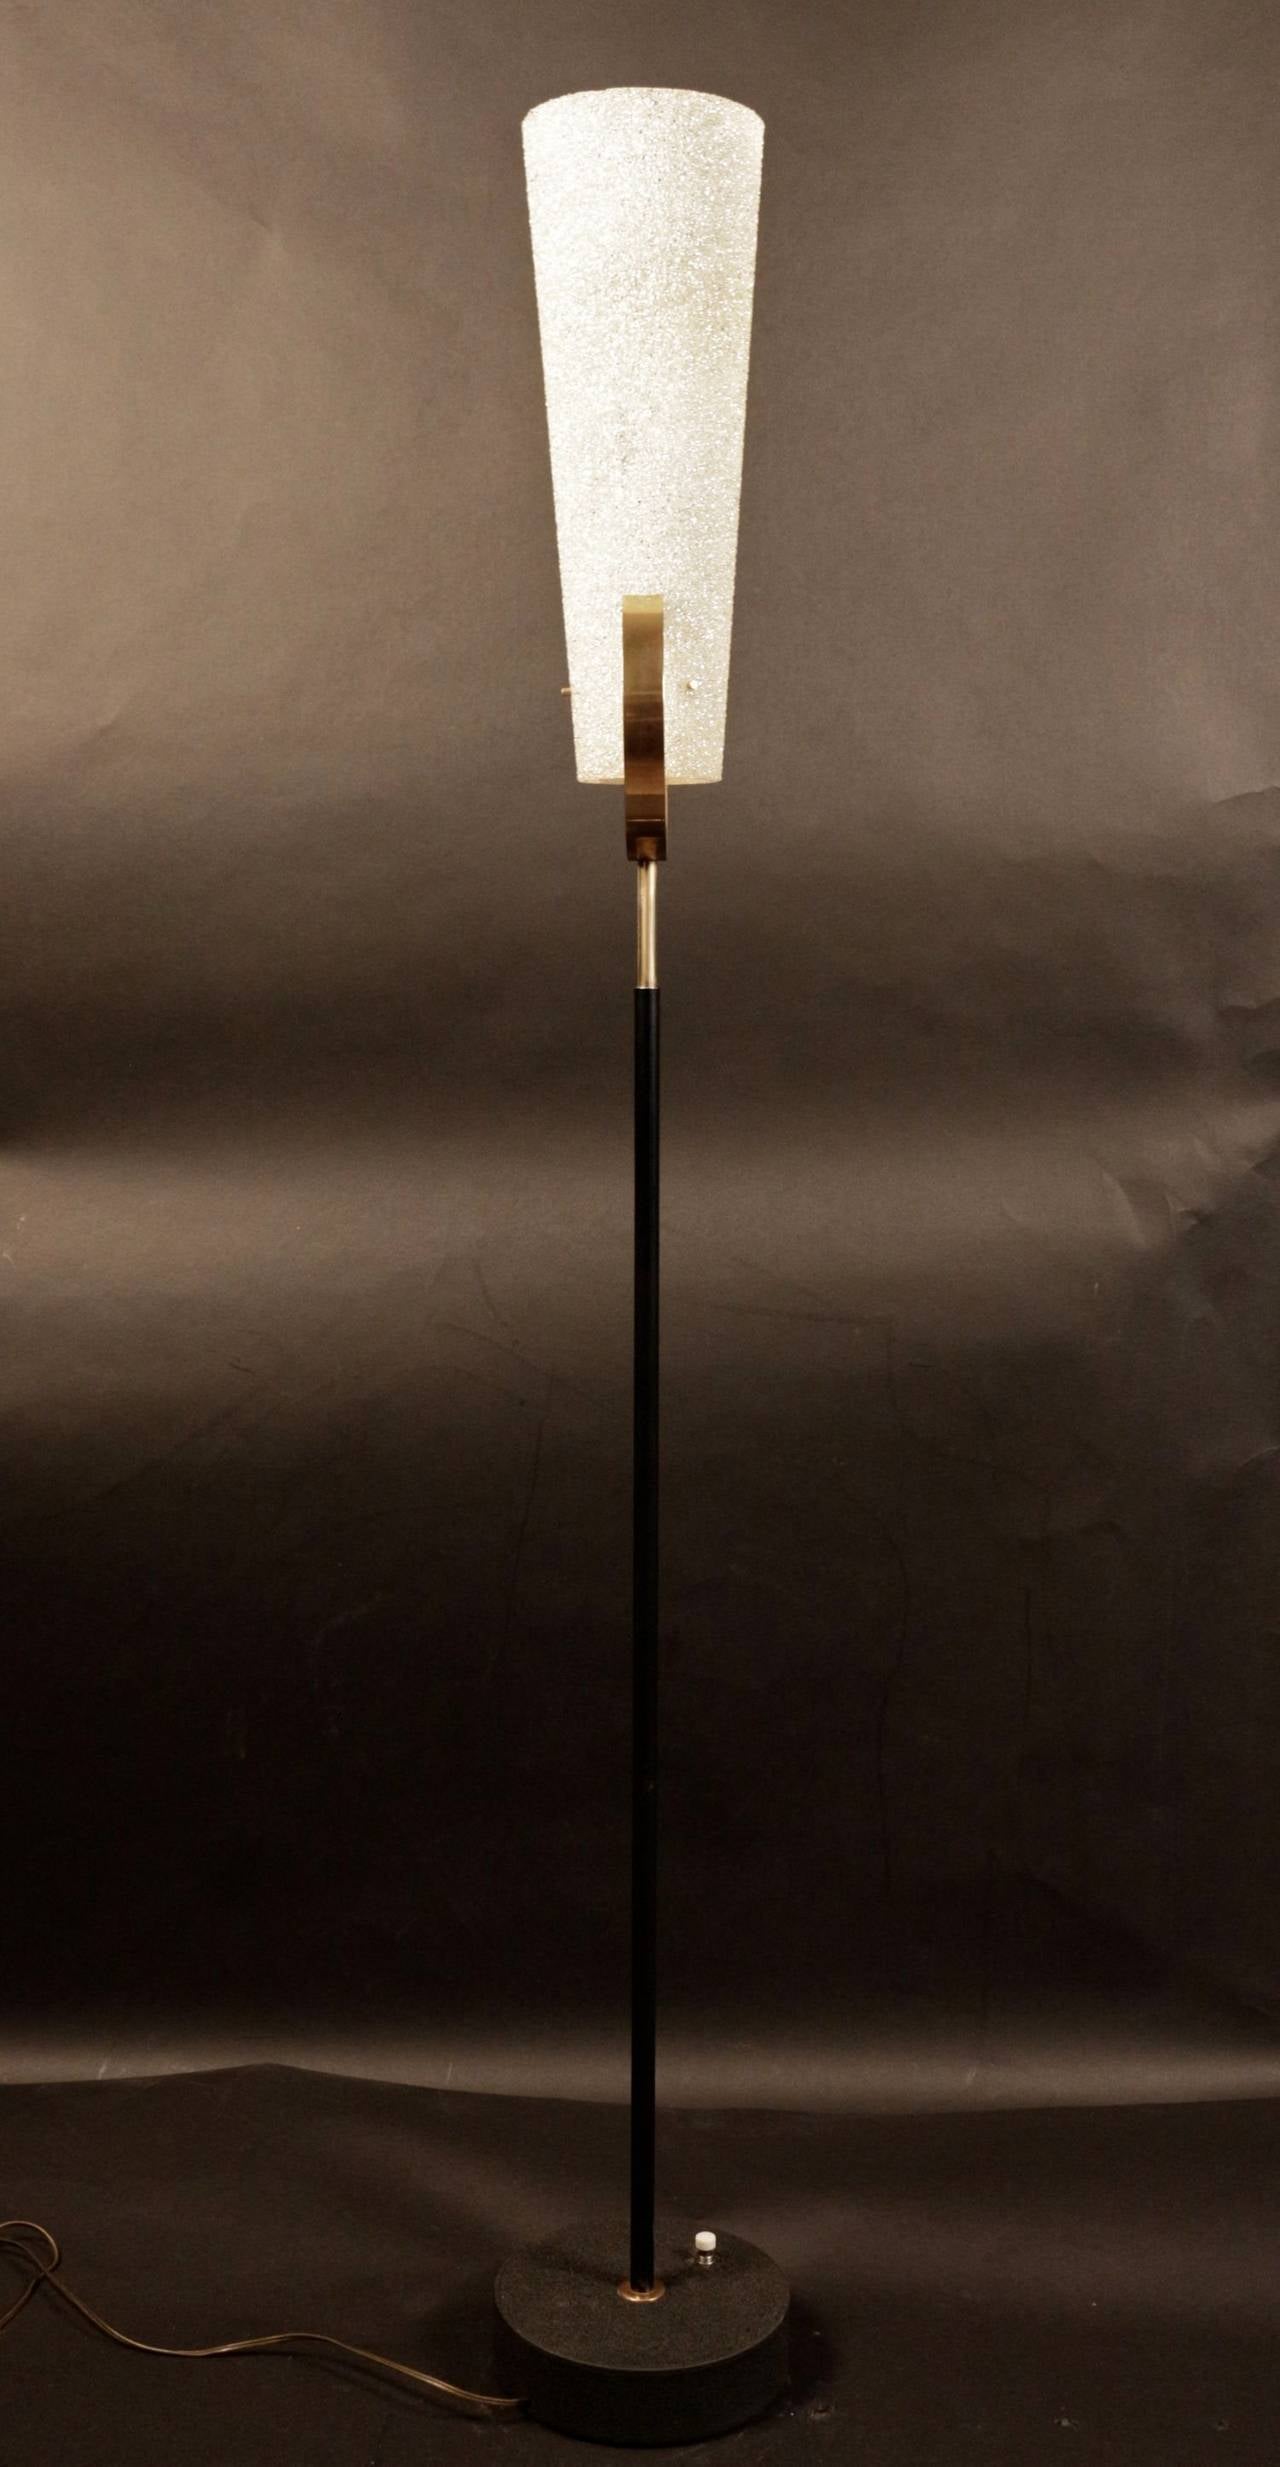 1950s Buckle Floor Lamp by Maison Lunel.

Composed of a blackened metal shaft enhanced by brass at the top and decorated with a large gilt brass buckle. The cylindrical base is enhanced by a circular brass plate. The cylindrical lampshade is in